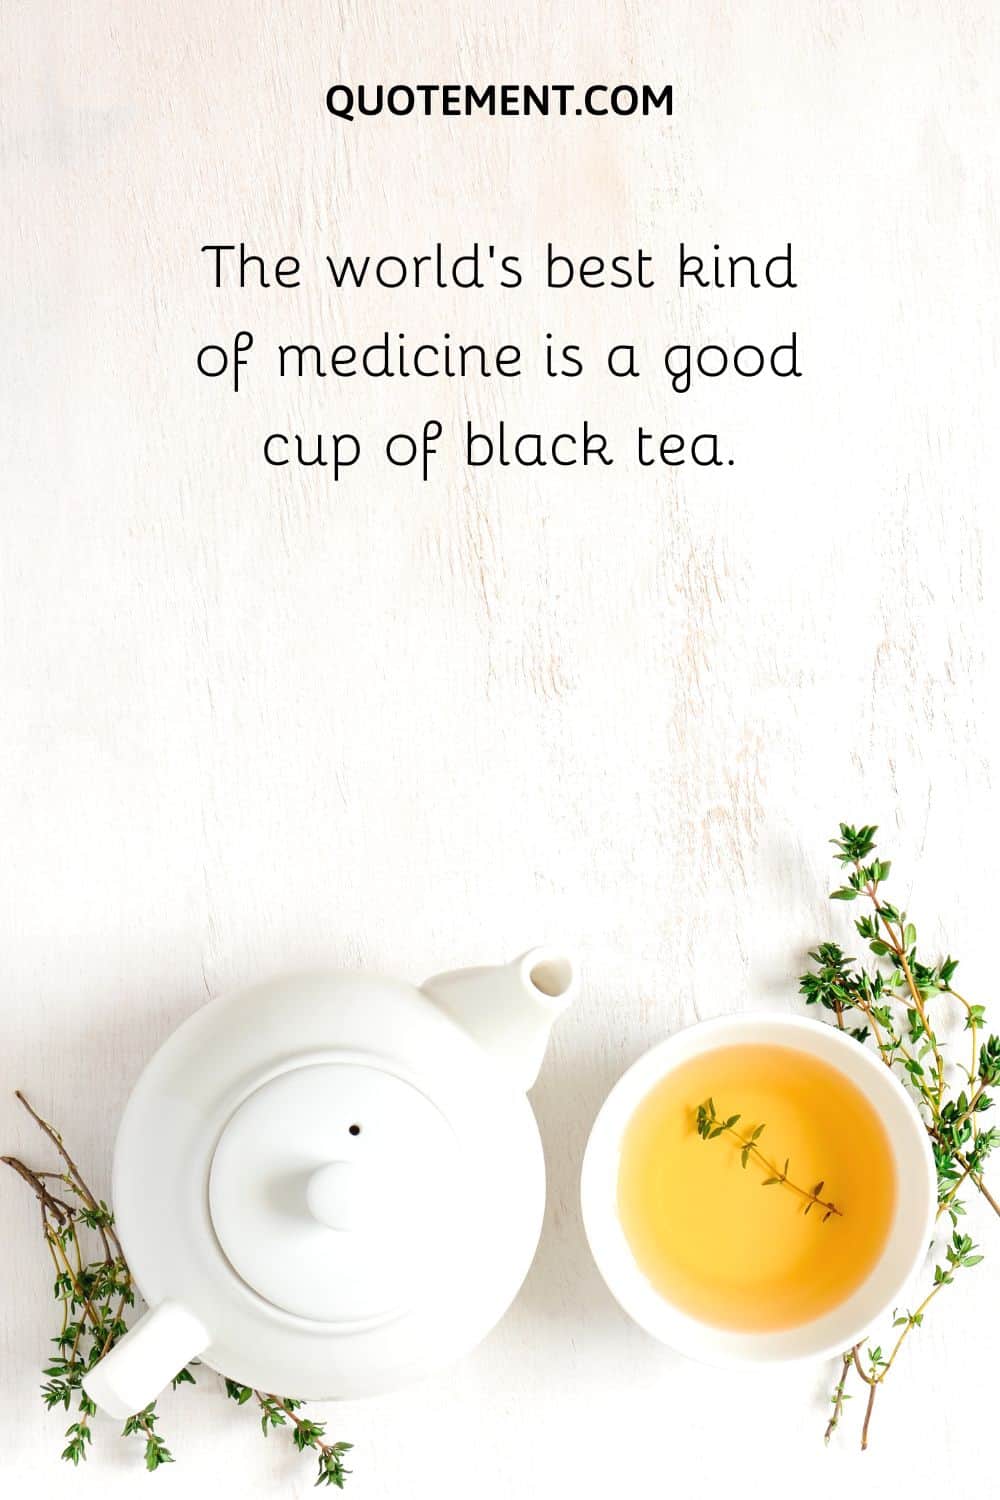 The world’s best kind of medicine is a good cup of black tea.